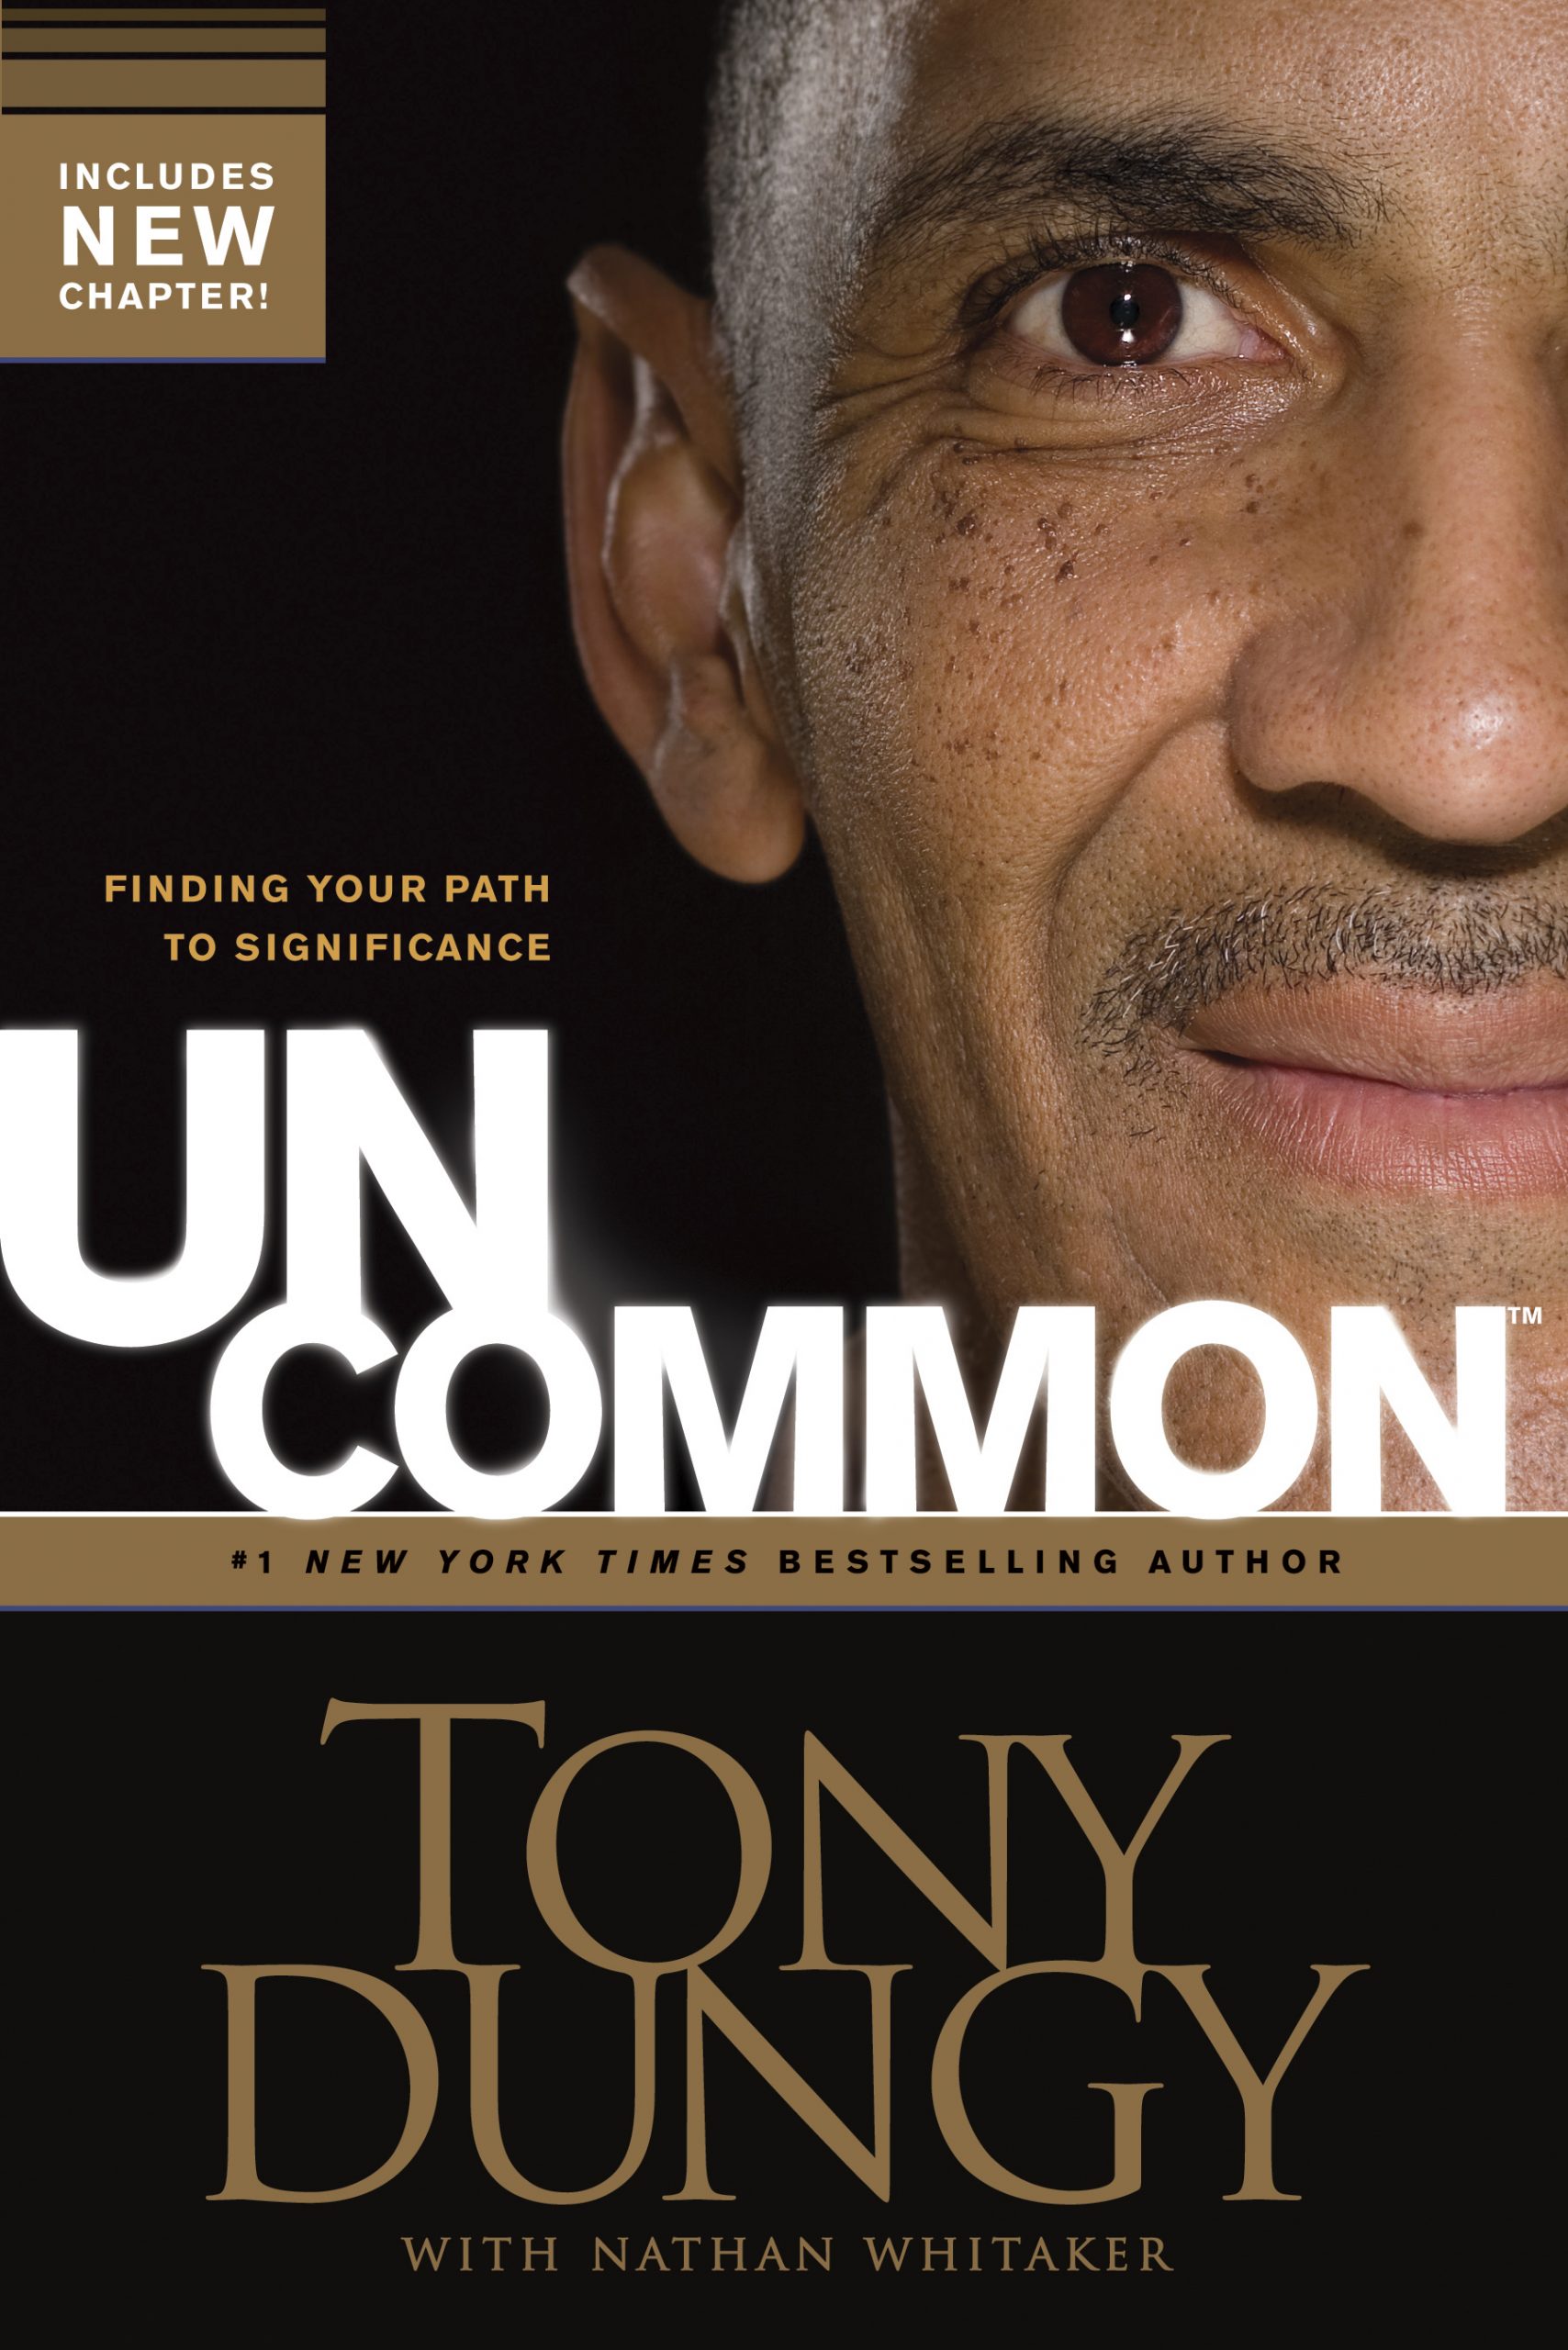 The cover of the book "Uncommon" by Tony Dungy with Nathan Whitaker